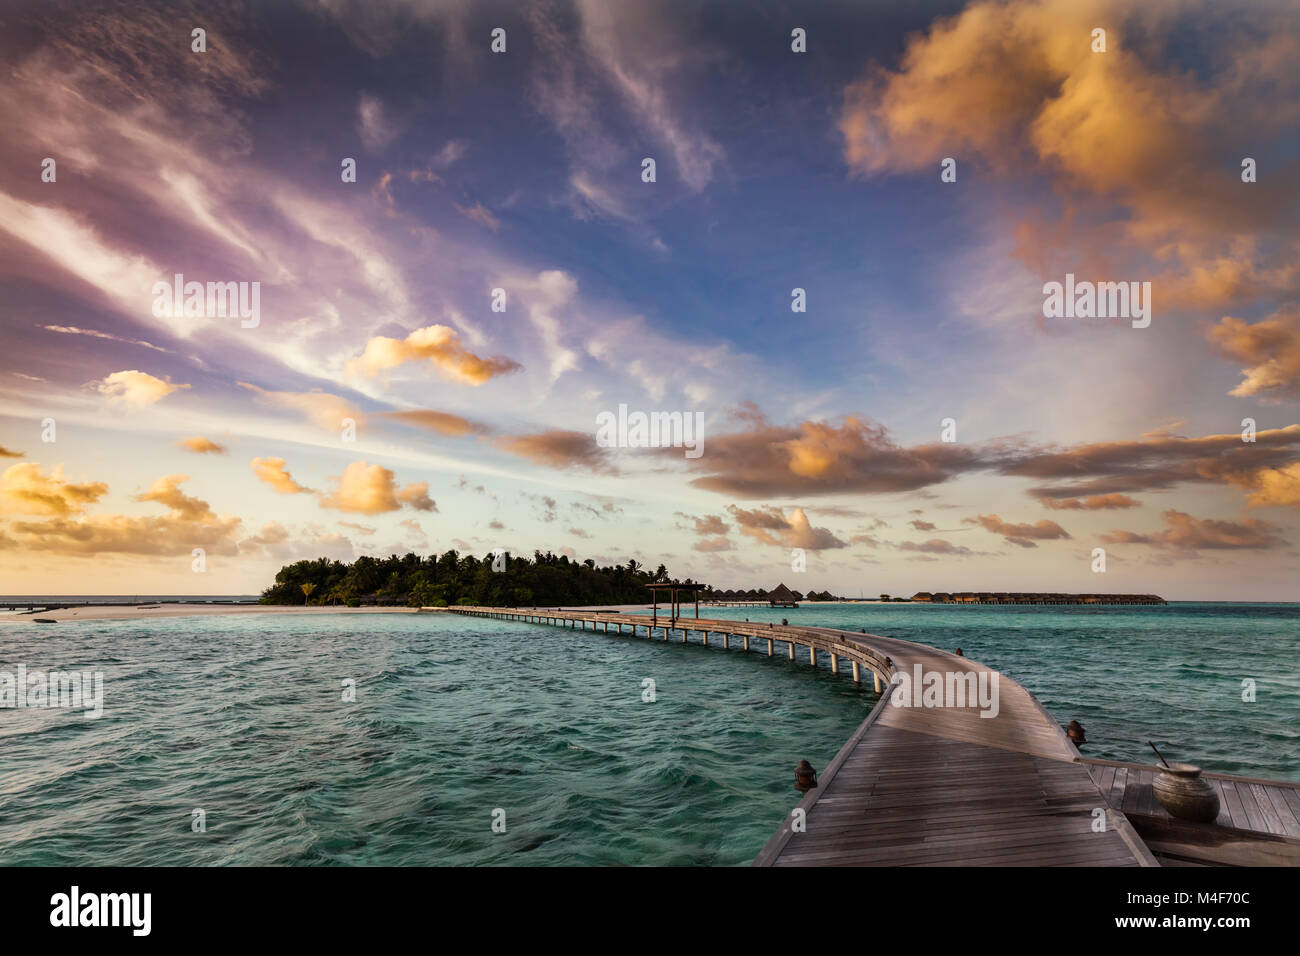 Wooden jetty towards a small island in Maldives at sunset Stock Photo